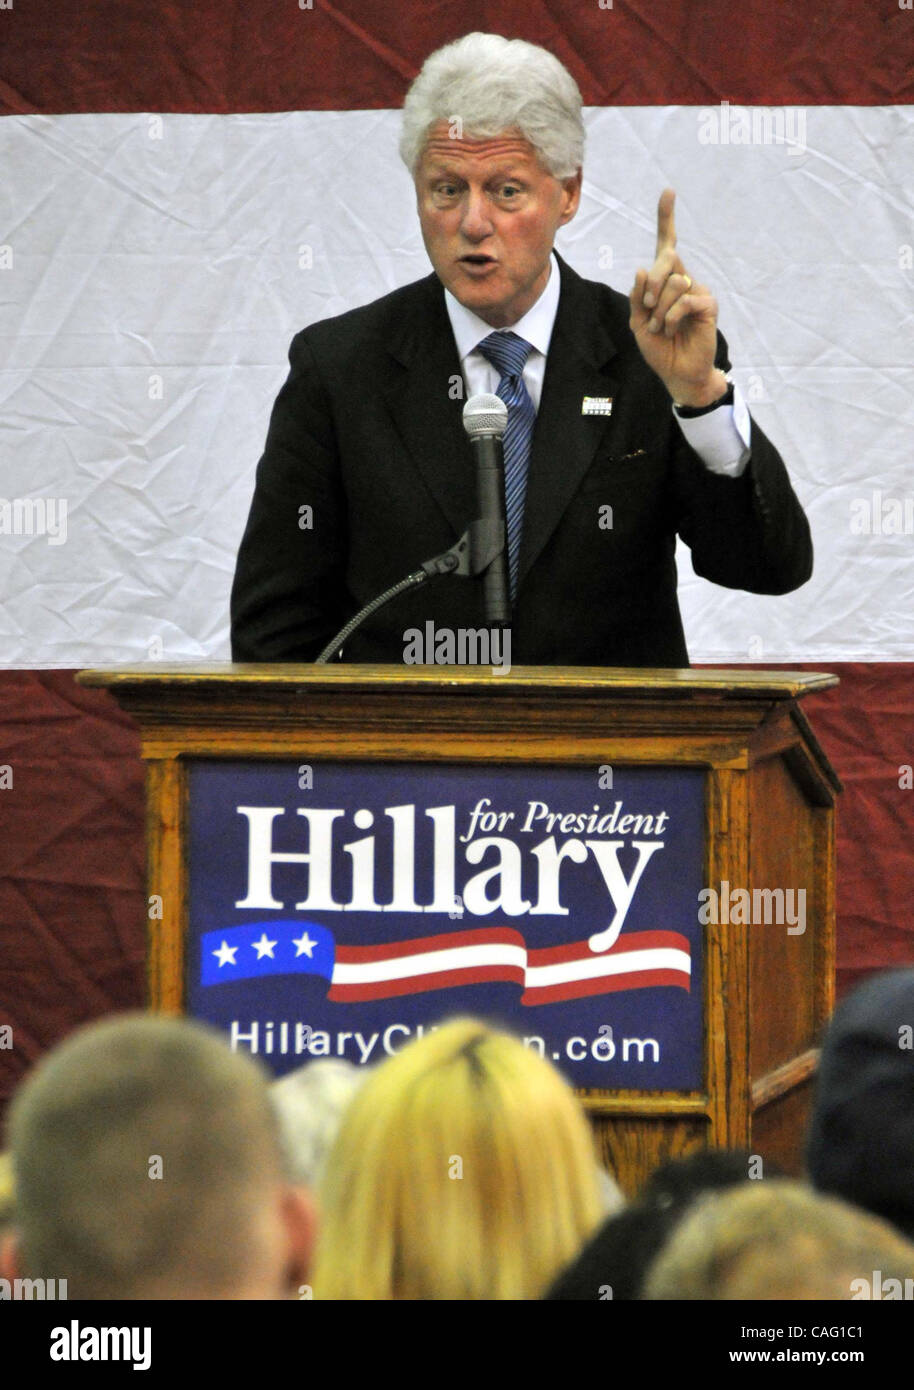 Feb 24, 2008 - Lima, Ohio, USA - Former president BILL CLINTON speaks before a packed crowd of several thousand in Lima, Ohio. Clinton was campaigning for his wife, Hillary, and spoke of the urgent need to return jobs to america and stop borrowing money from China, Japan and Saudi Arabia to finance  Stock Photo